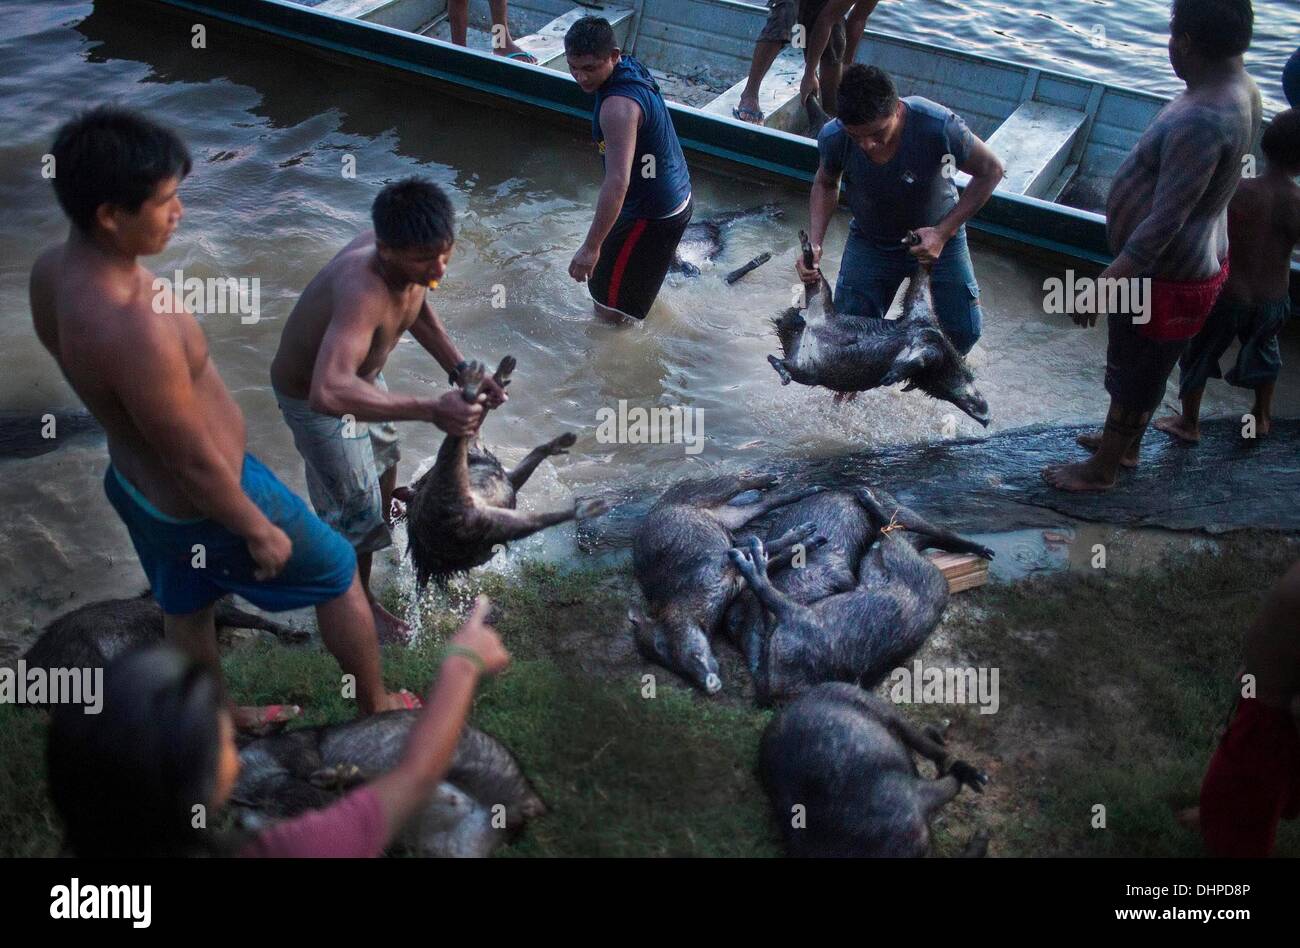 May 5, 2013 - Poti-Kro, Para, Brazil - Xikrin hunters offload a large haul of peccary to be cleaned in the river in the remaining light of day. For the next few days, the villagers will eat mostly peccary so that the meat will not go to waste. The indigenous Xikrin people live on the Bacaja, a tributary of the Xingu River, where construction of the Belo Monte Dam is reaching peak construction. Some scientists warn that the water level of the Bacaja will decrease precipitously due to the dam. (Credit Image: © Taylor Weidman/ZUMA Wire/ZUMAPRESS.com) Stock Photo